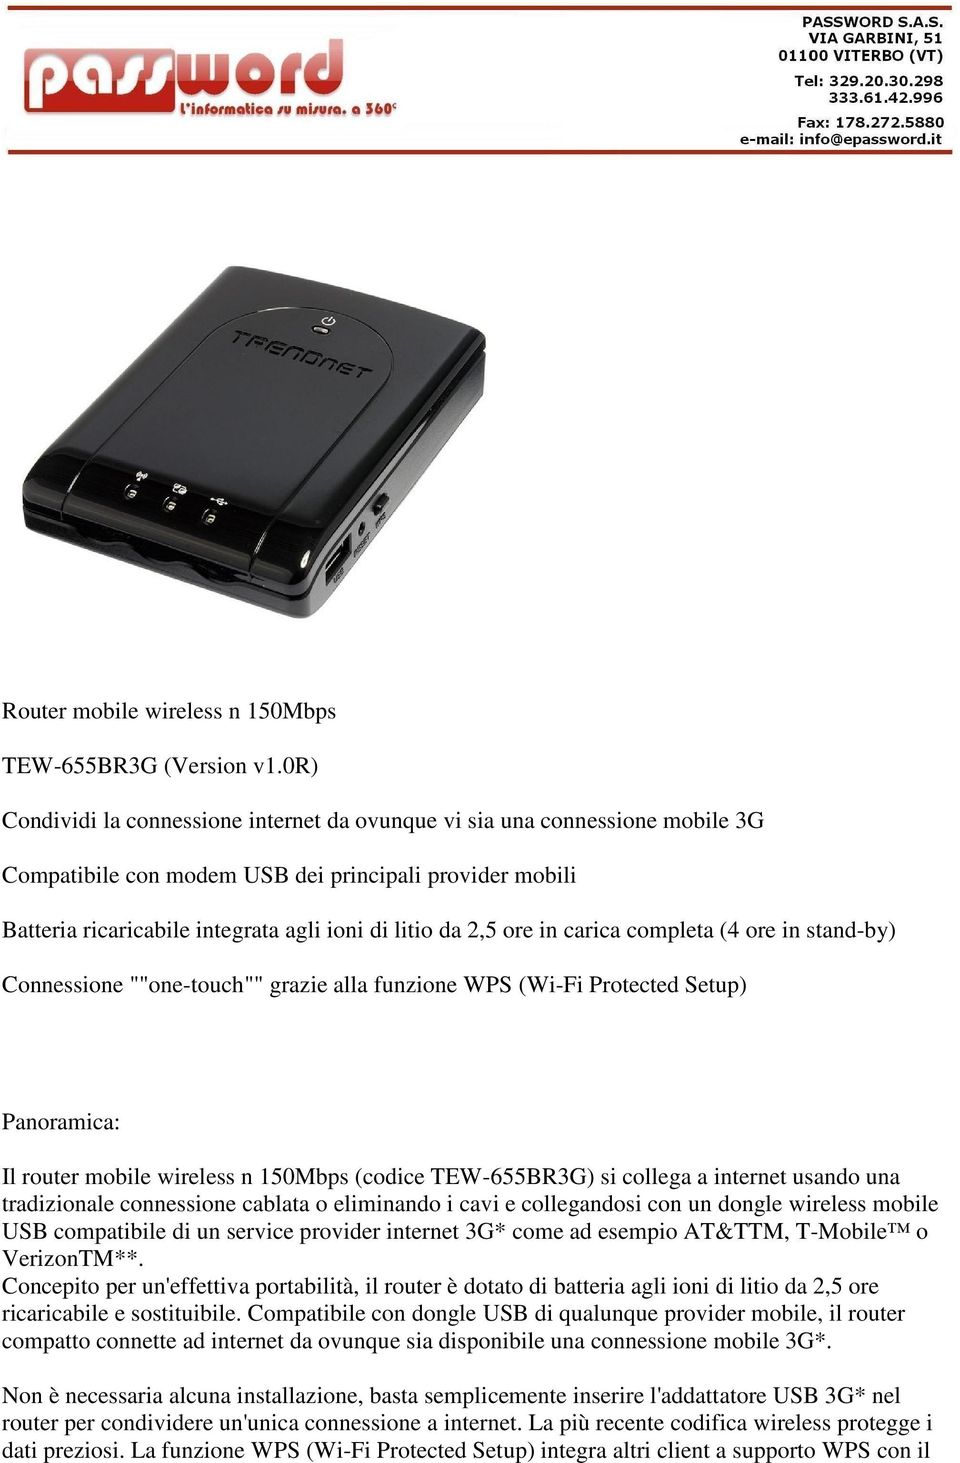 ore in carica completa (4 ore in stand-by) Connessione ""one-touch"" grazie alla funzione WPS (Wi-Fi Protected Setup) Panoramica: Il router mobile wireless n 150Mbps (codice TEW-655BR3G) si collega a